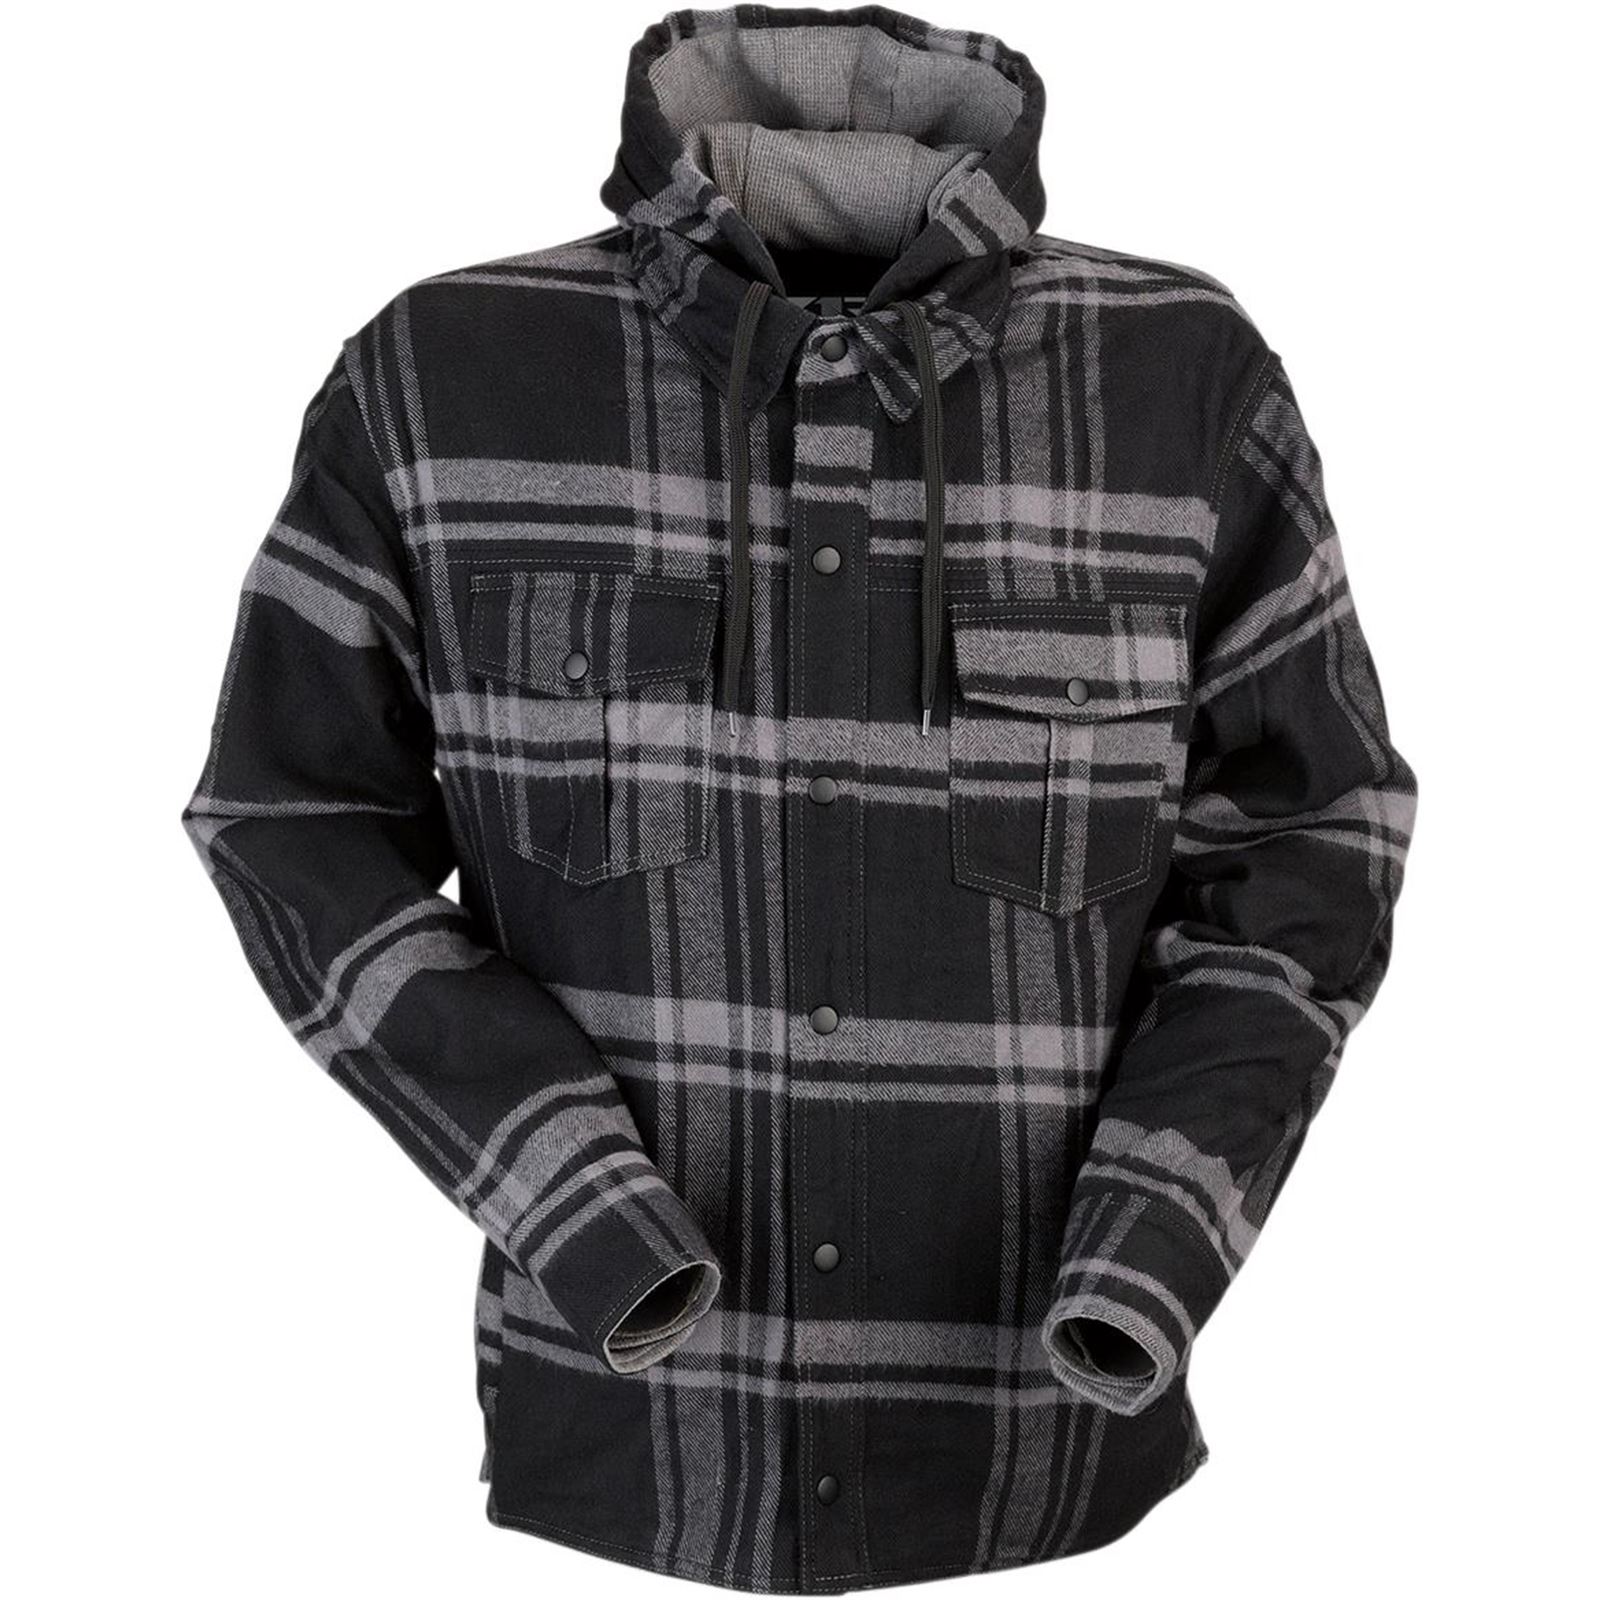 Z1R Timber Flannel Shirt - Black/Gray - 2X-Large